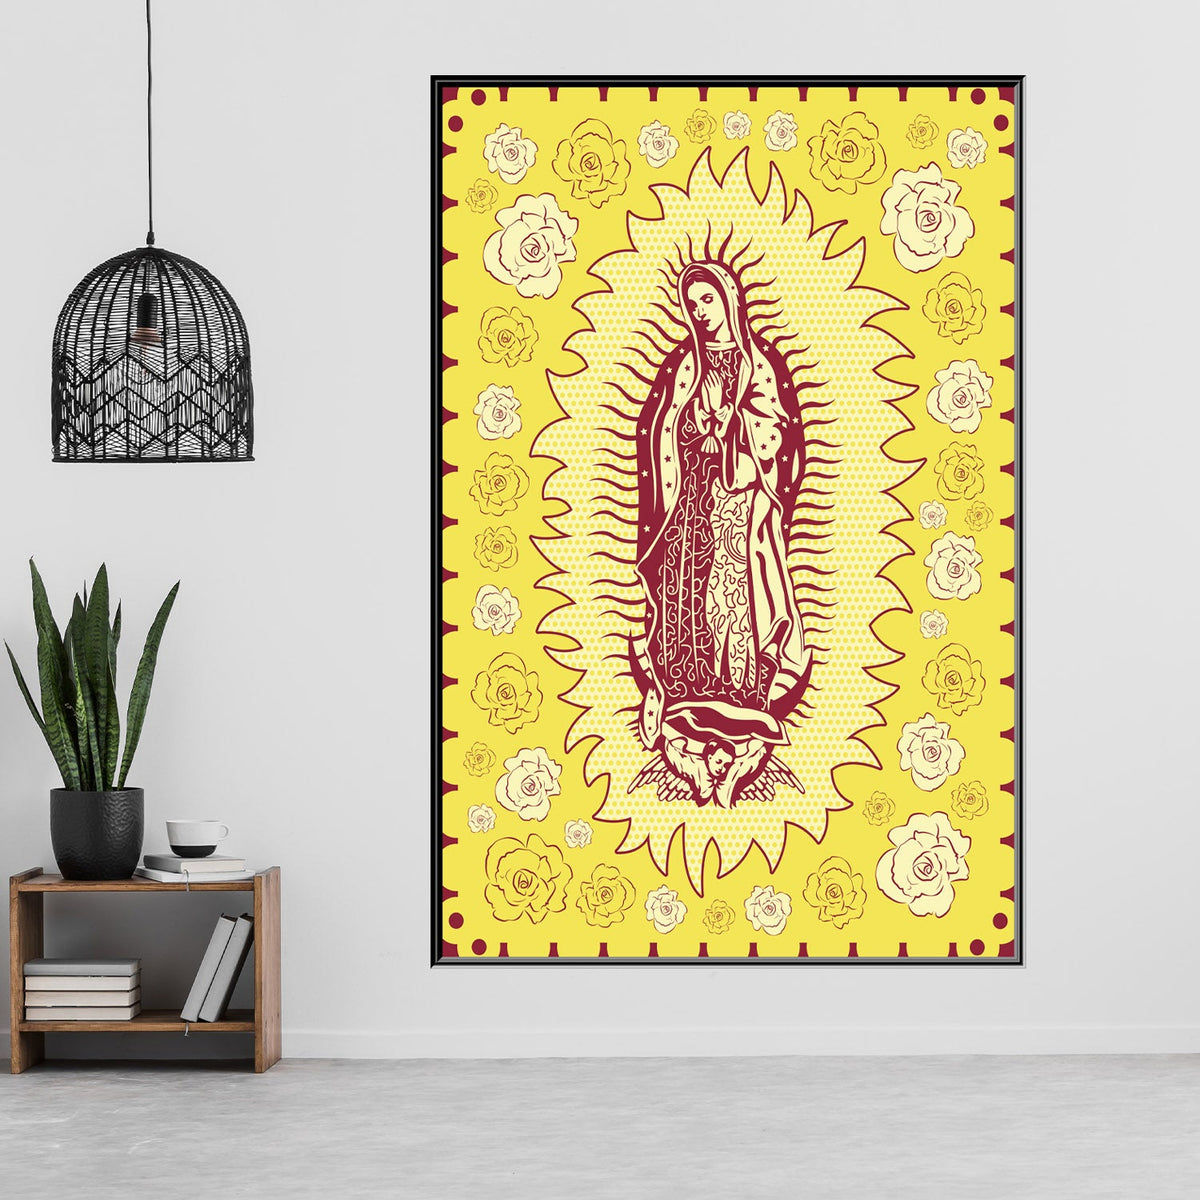 https://cdn.shopify.com/s/files/1/0387/9986/8044/products/OurLadyofGuadalupeCanvasArtprintFloatingFrame-2.jpg